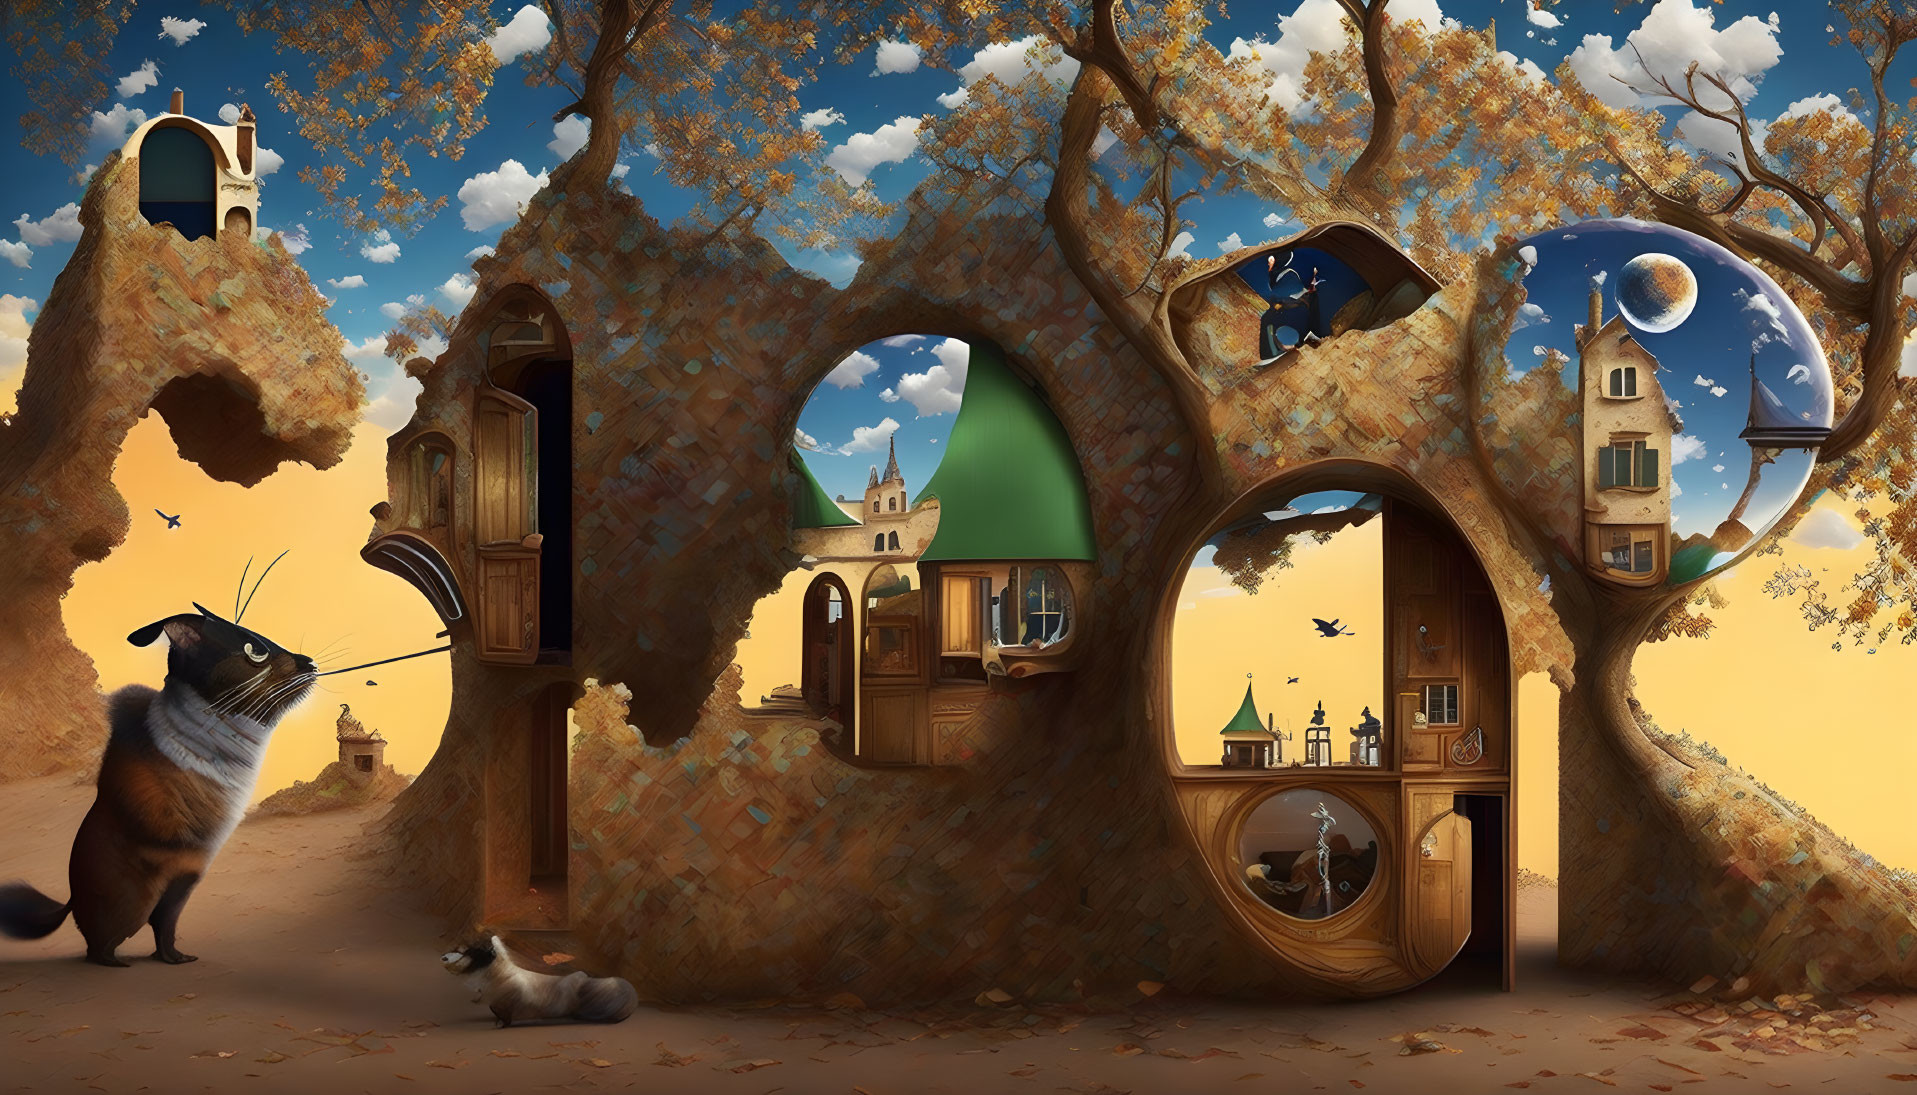 Surreal Artwork: Giant Tree Trunks, Cozy Rooms, Ladders, Stairs